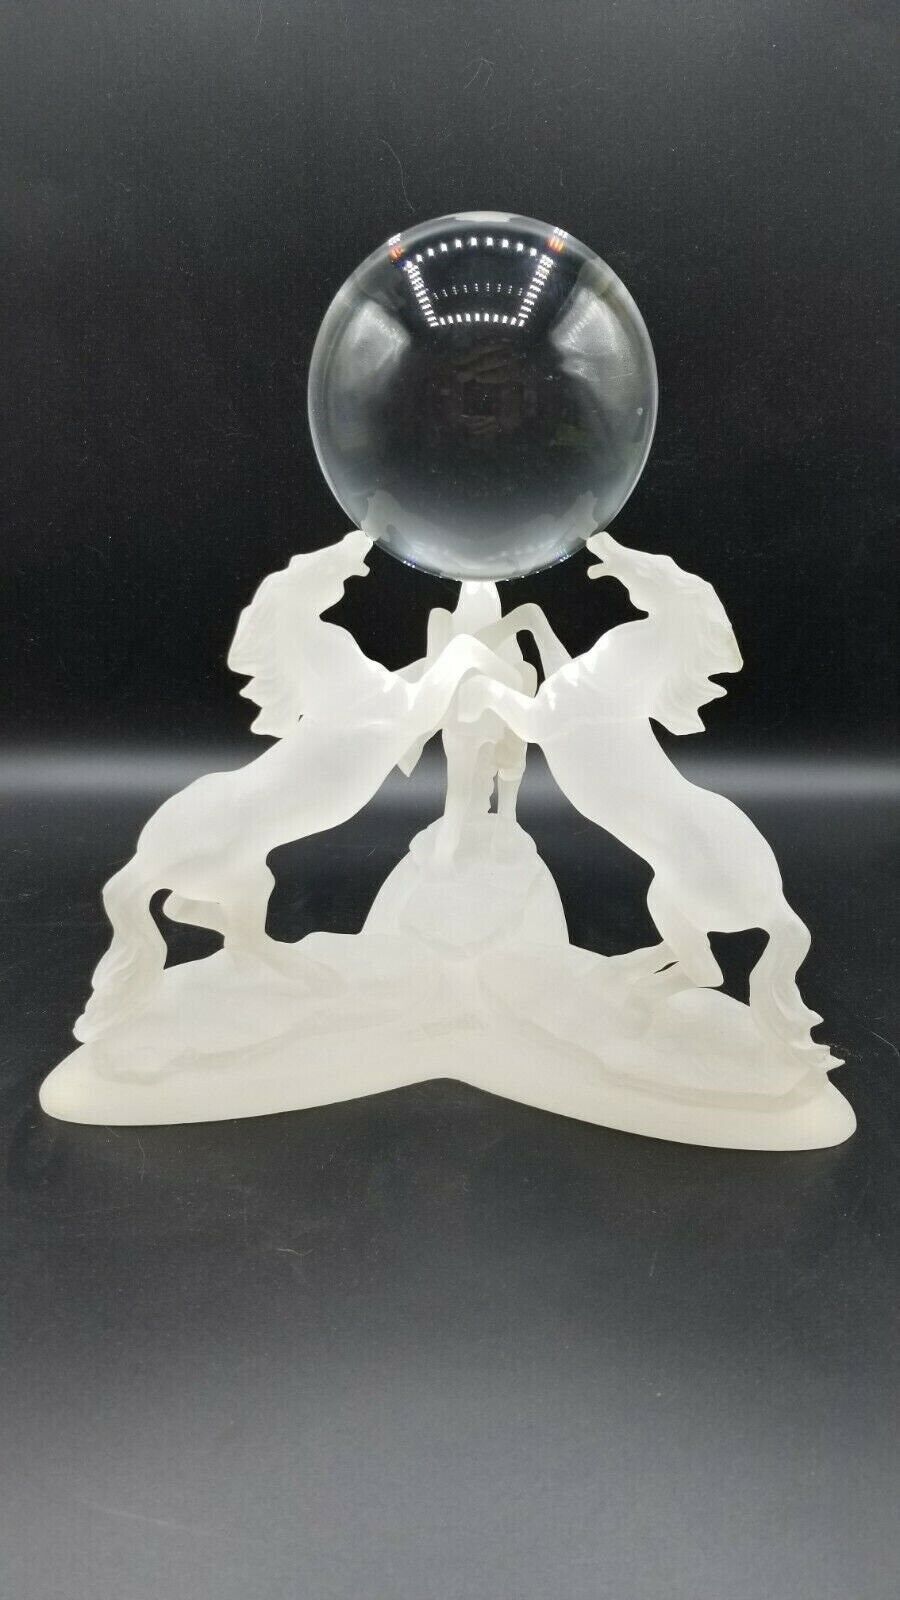 Three Frosted Rearing Horses Holding a Crystal Ball Gass Figurine 